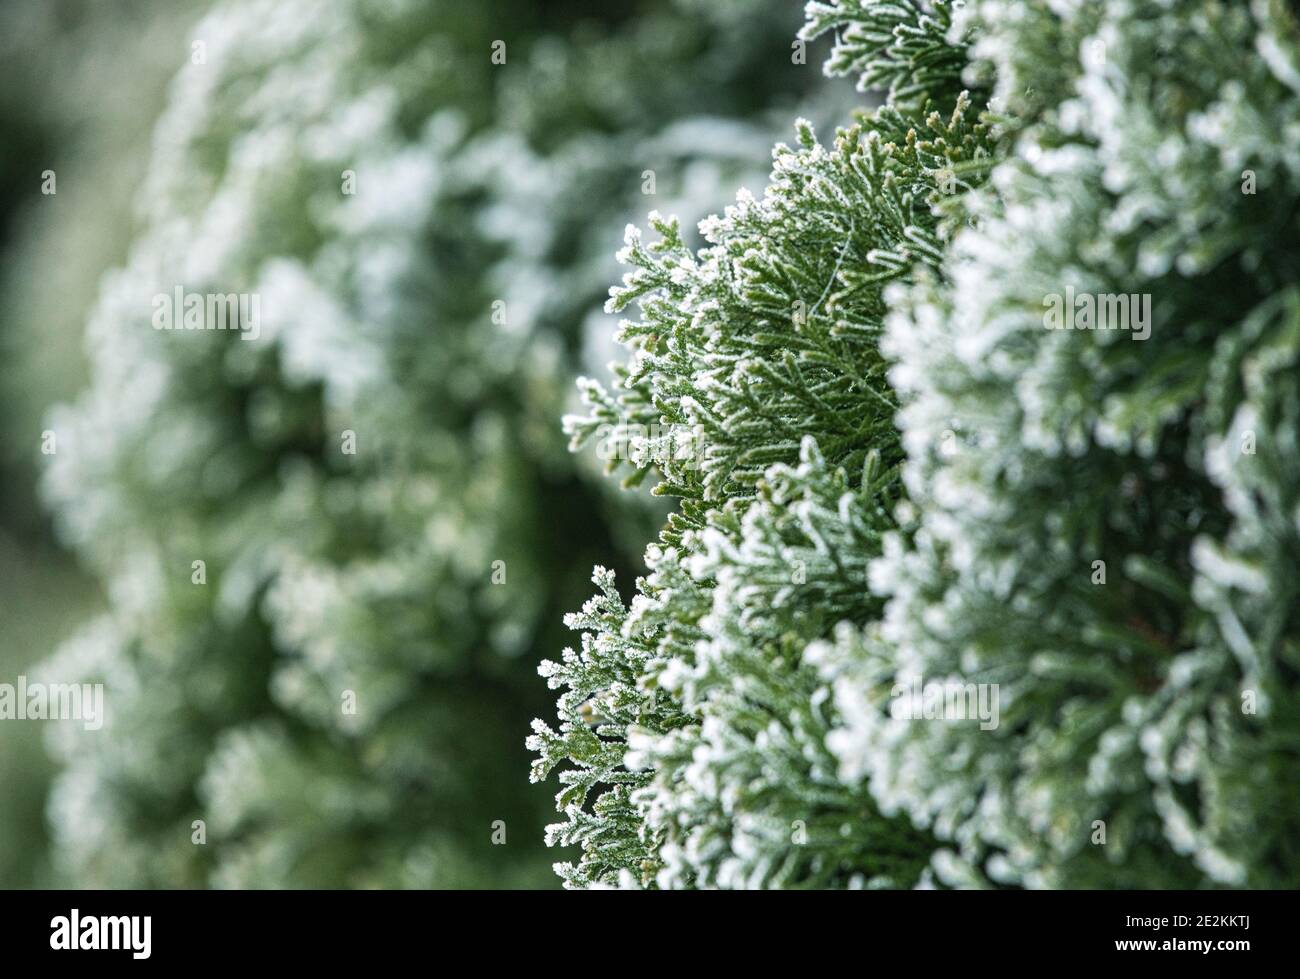 Backyard Garden All Seasons Green Thuja During Winter Time Extreme Low Temperatures. Plants Covered by Ice and Snow. Gardening and Landscaping Theme. Stock Photo